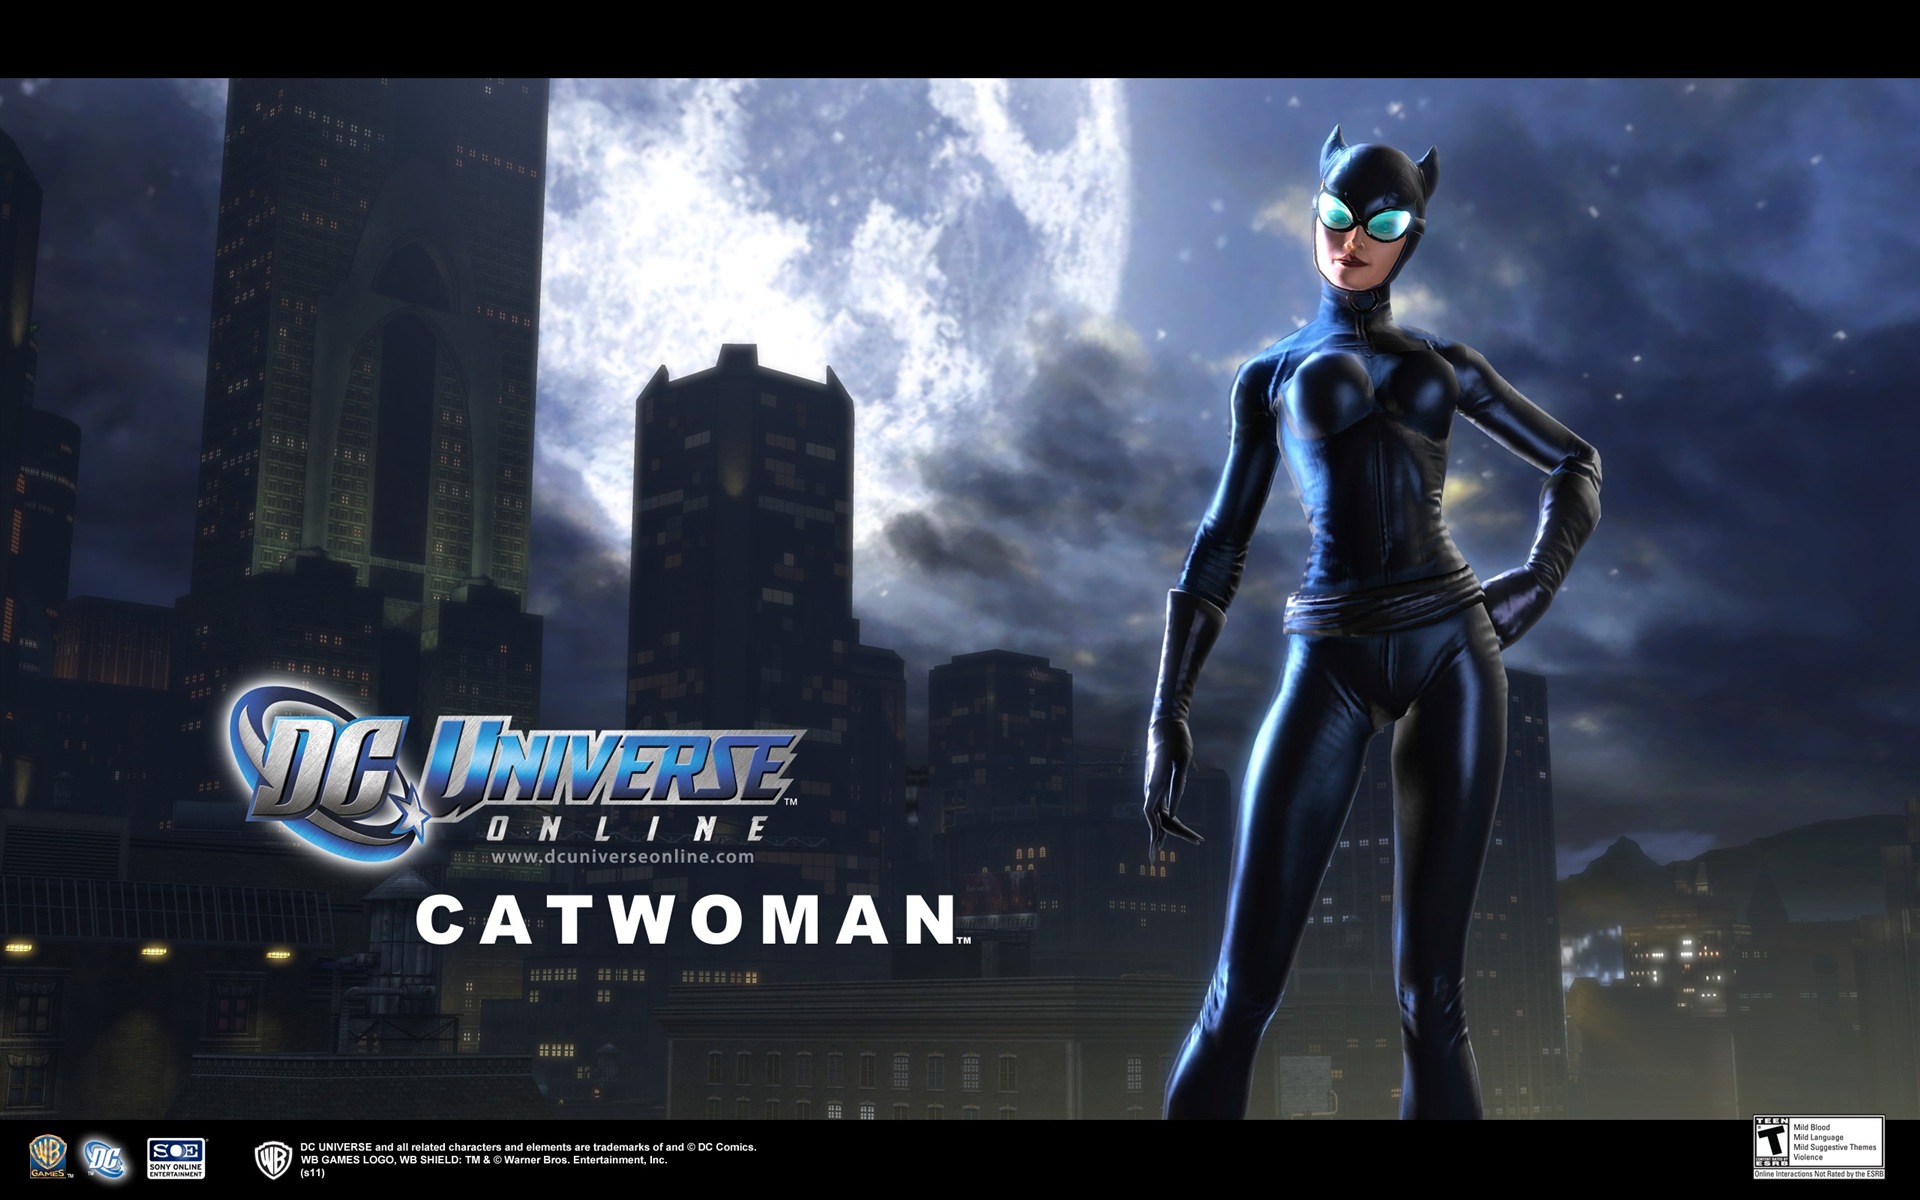 DC Universe Online HD game wallpapers #14 - 1920x1200